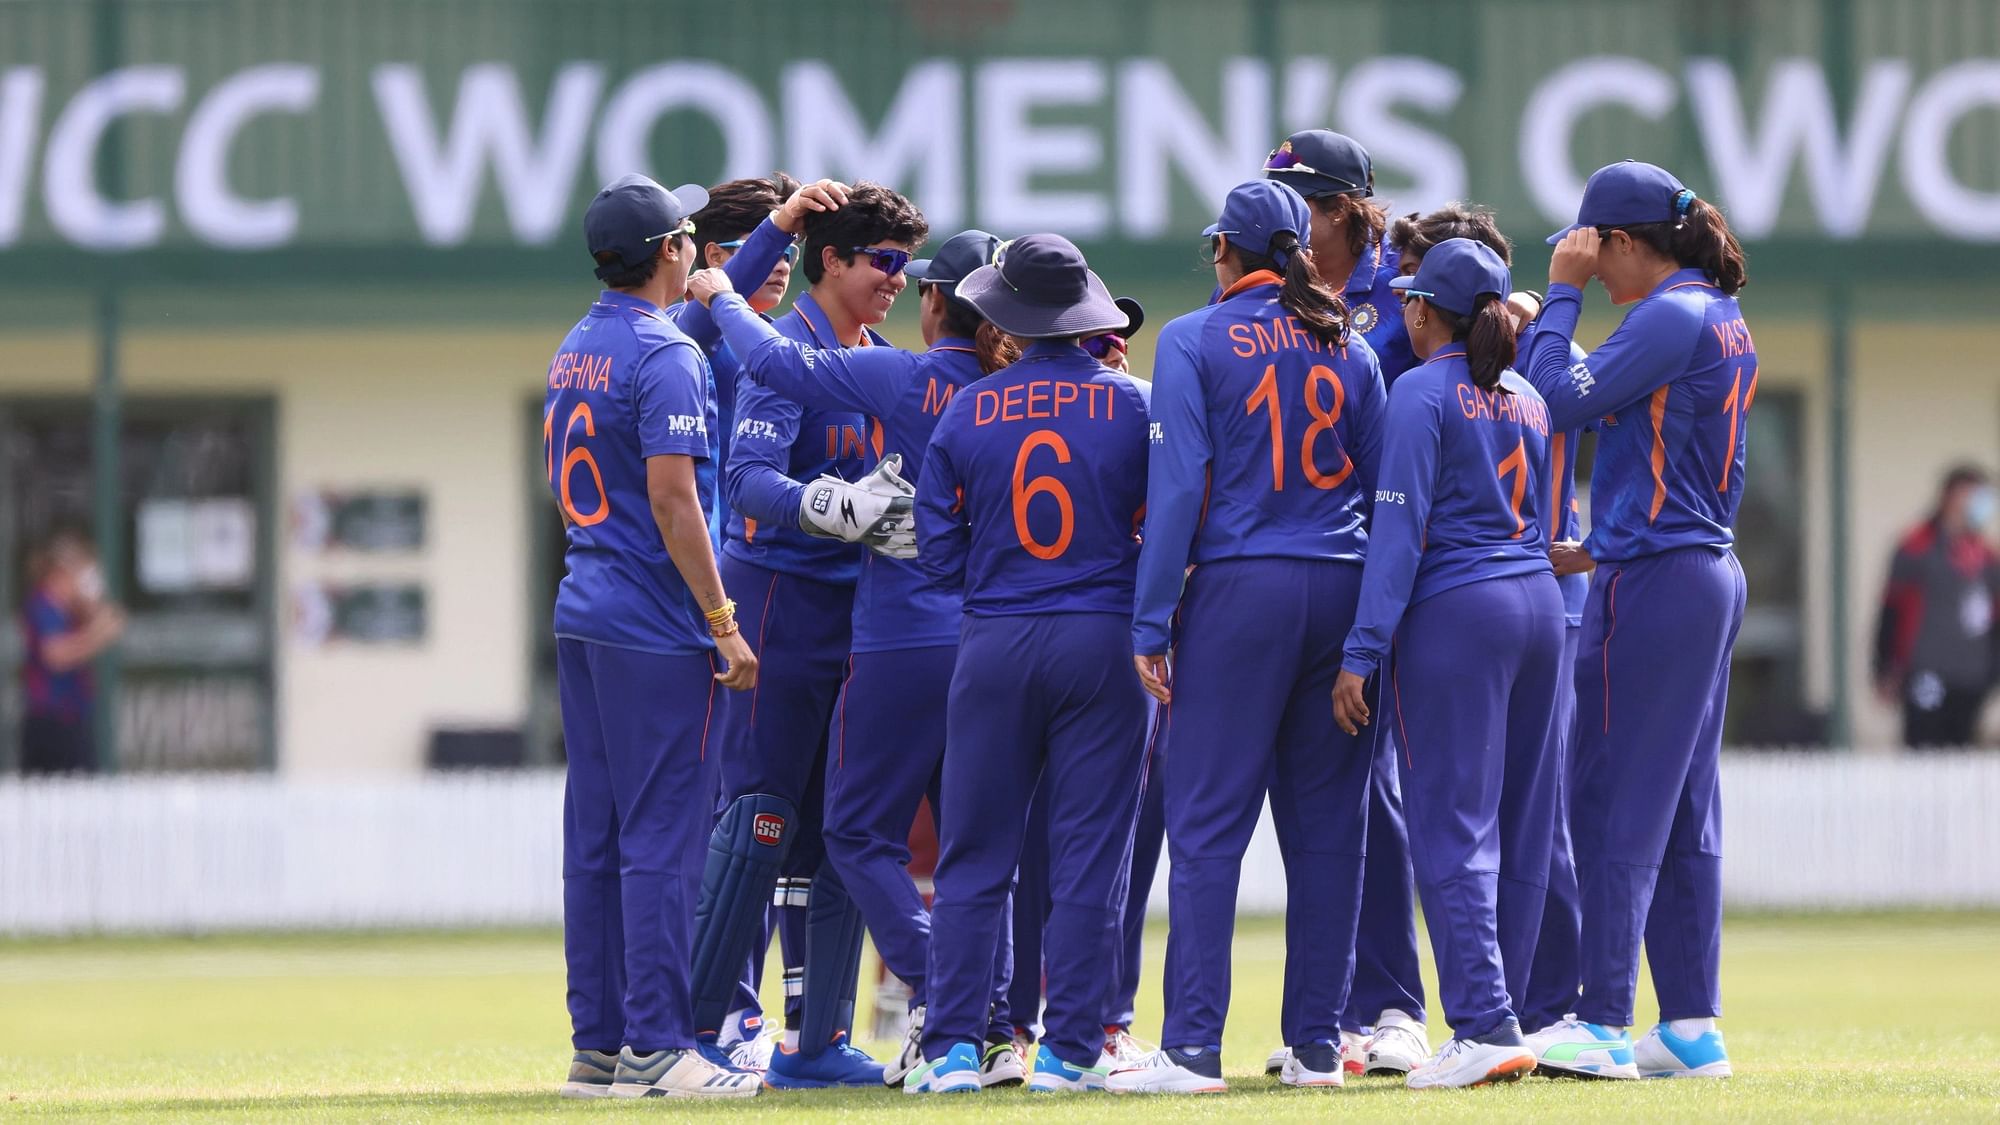 <div class="paragraphs"><p>The Indian women's cricket team will take on Pakistan in the CWG 2022 at Edgbaston on July 31.</p></div>